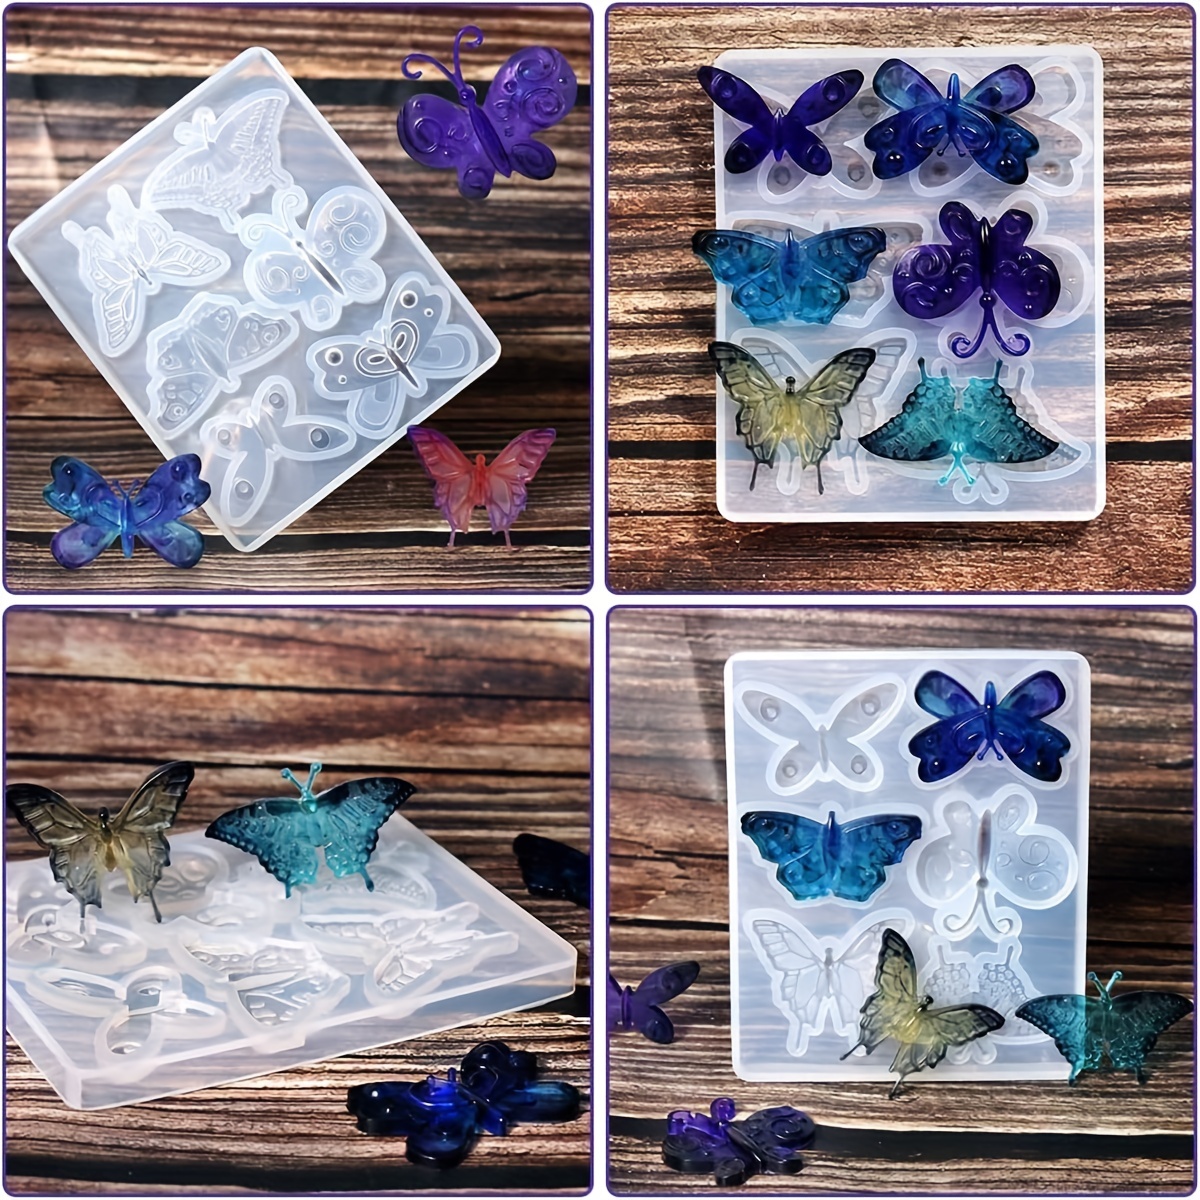 Butterfly Resin Molds - Small Pendant Silicone Molds for Casting